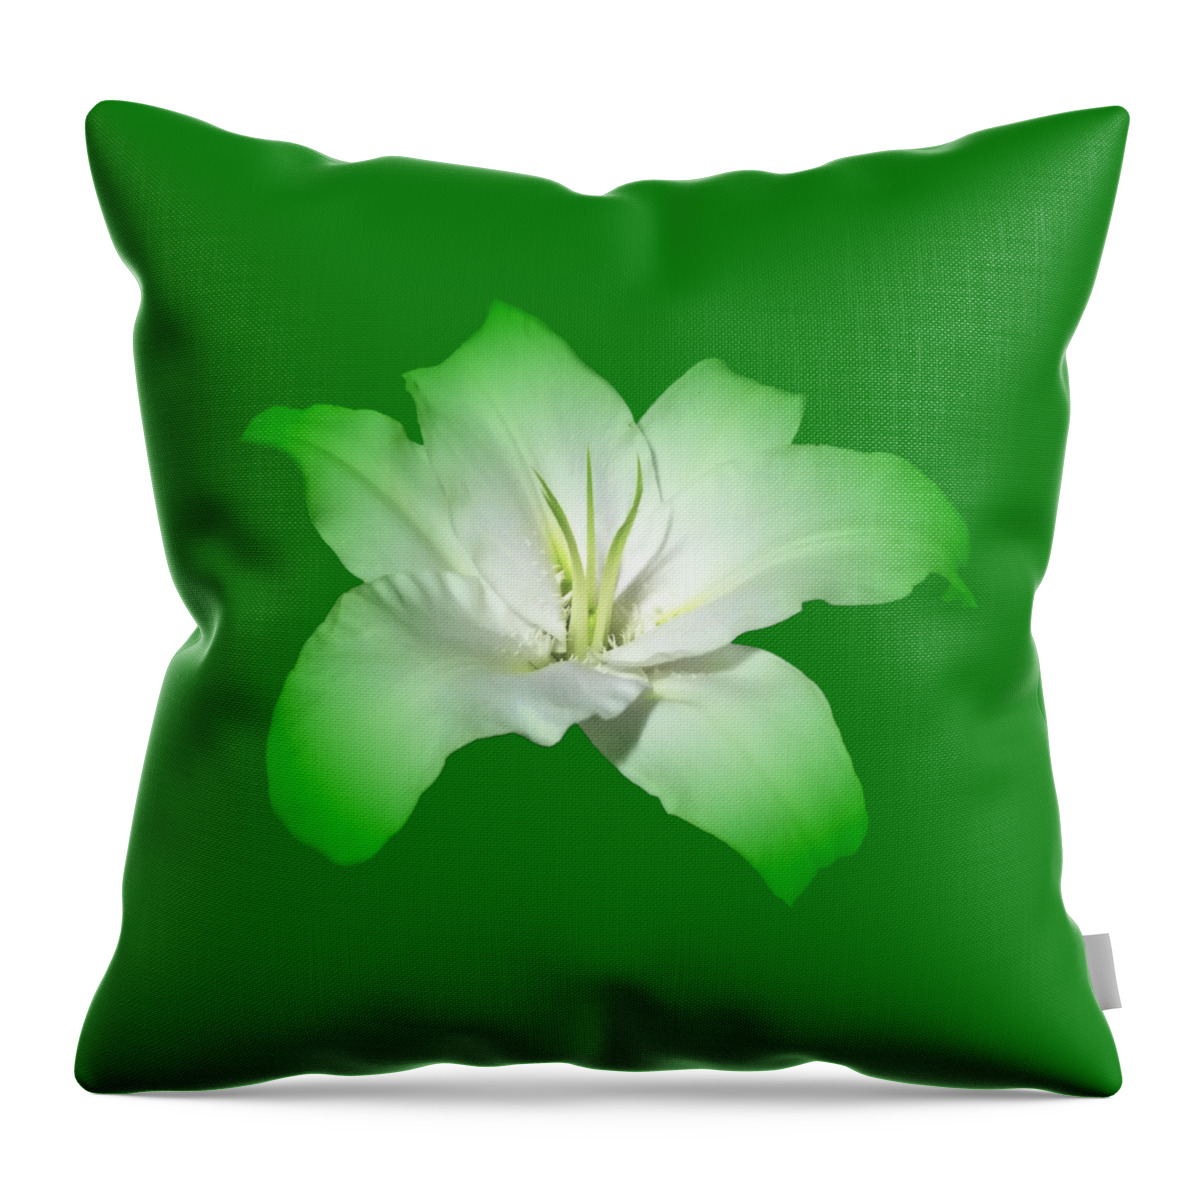 Green Throw Pillow featuring the photograph Green Lily Flower by Delynn Addams